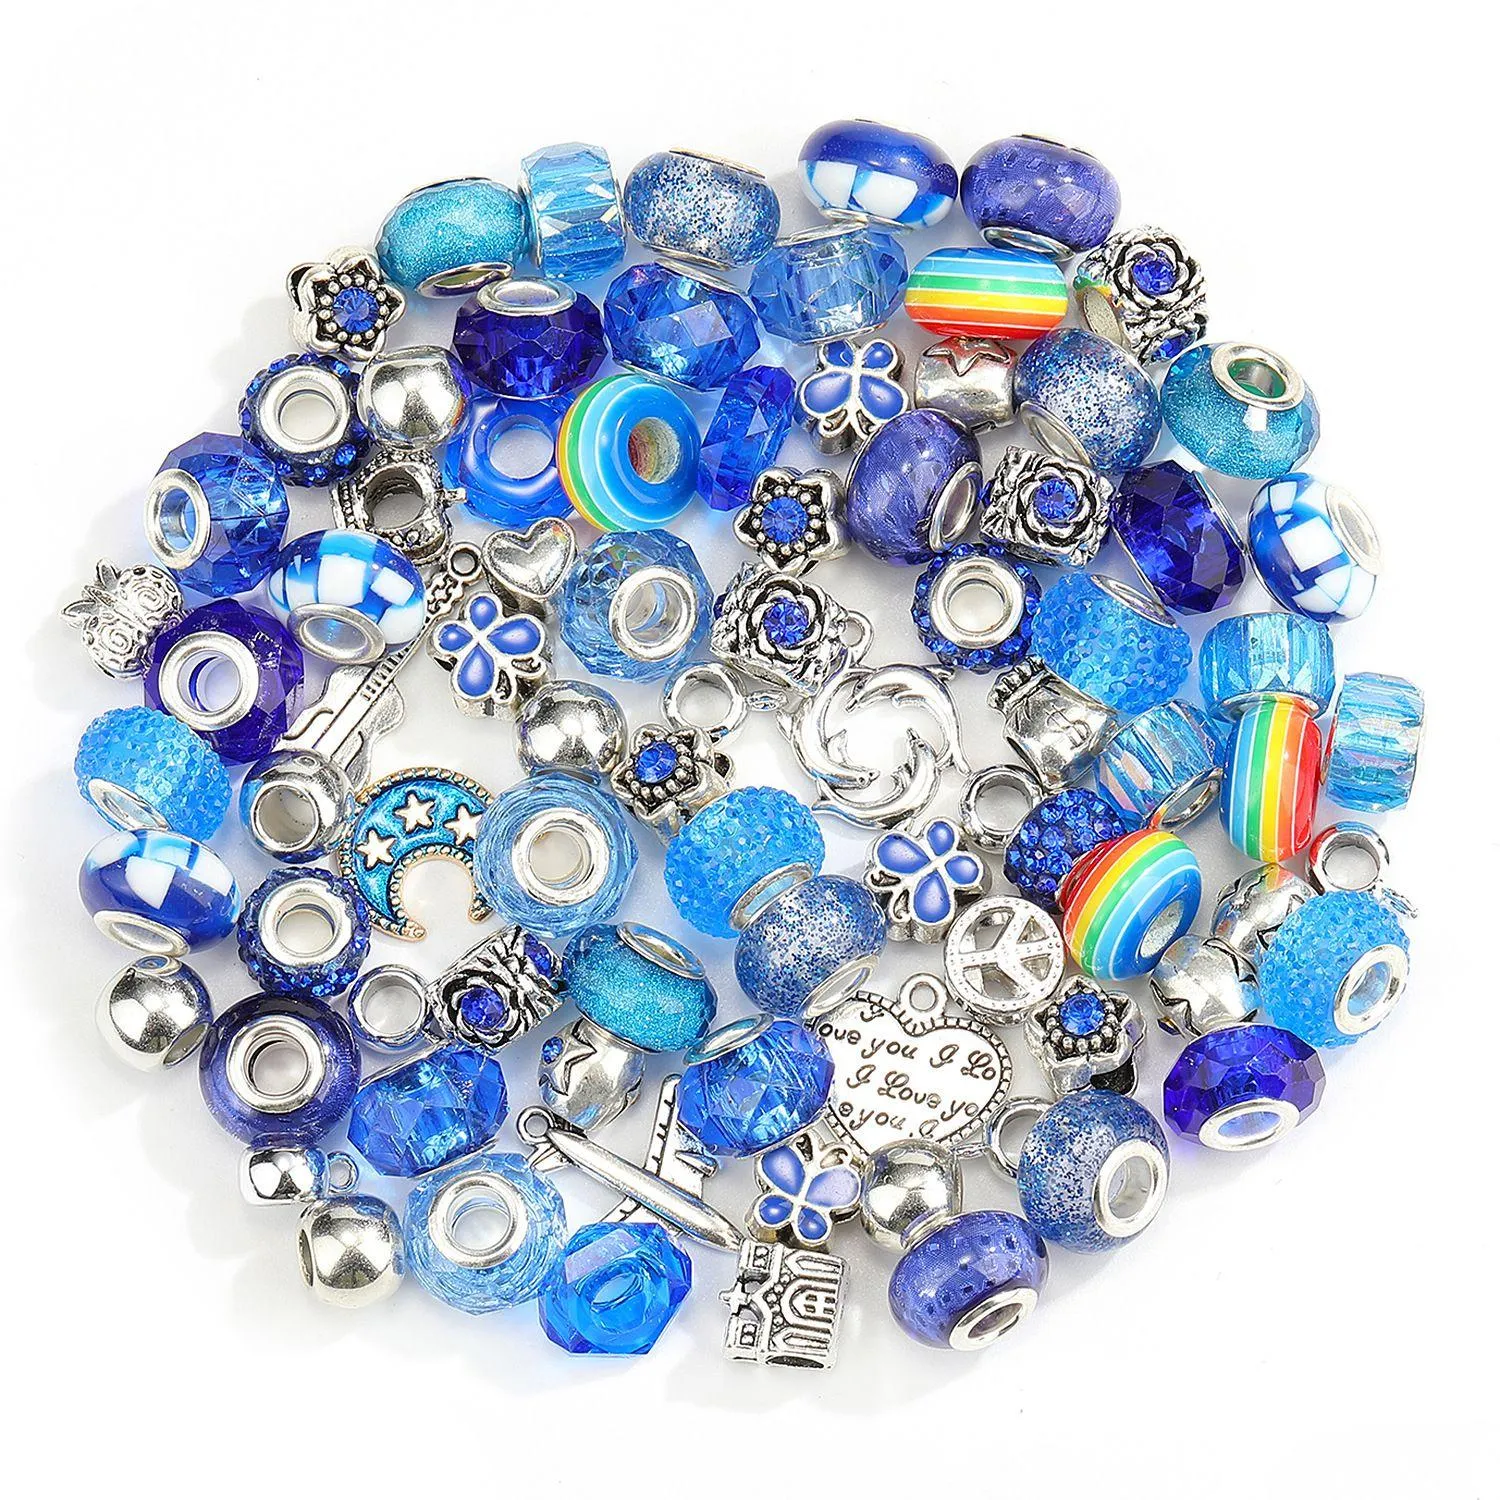 Charms 100Pcs Acrylic Resin Alloy Rainbow Big Hole European Beads Pendant Accessories For Girl Diy Necklace Bracelet Jewelry Making Dr Dhezq